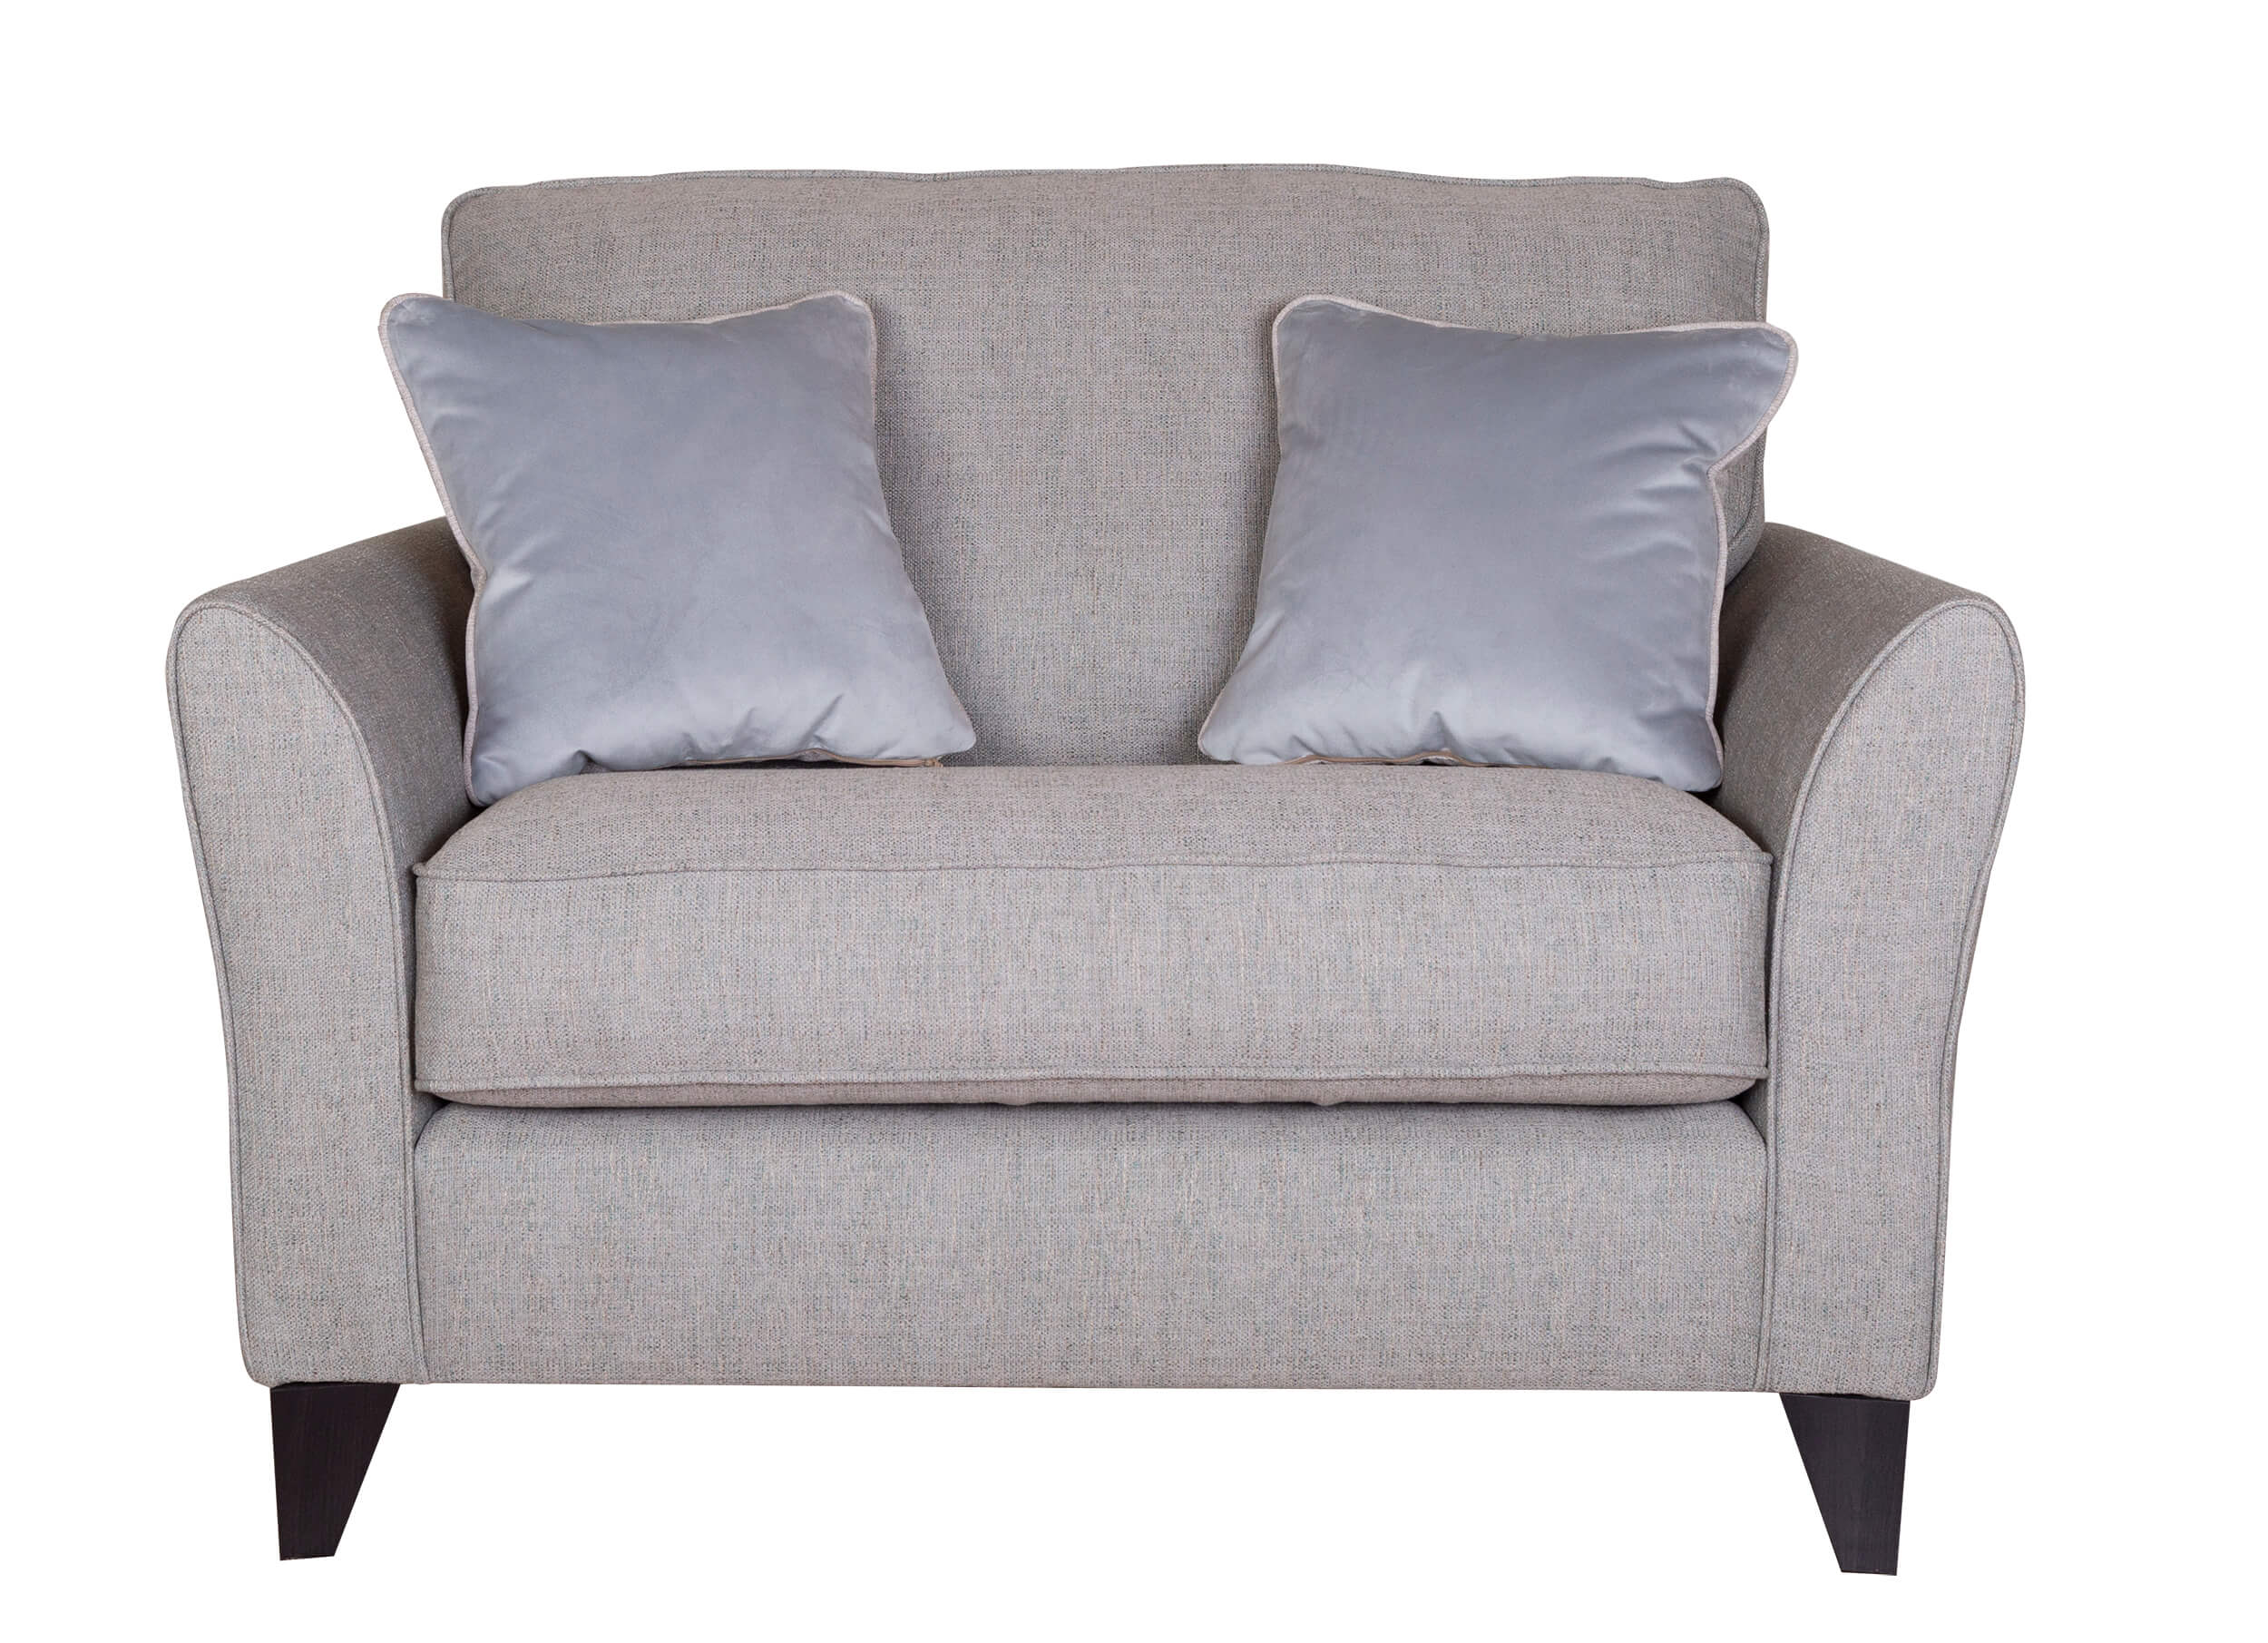 Showing image for Springfield loveseat